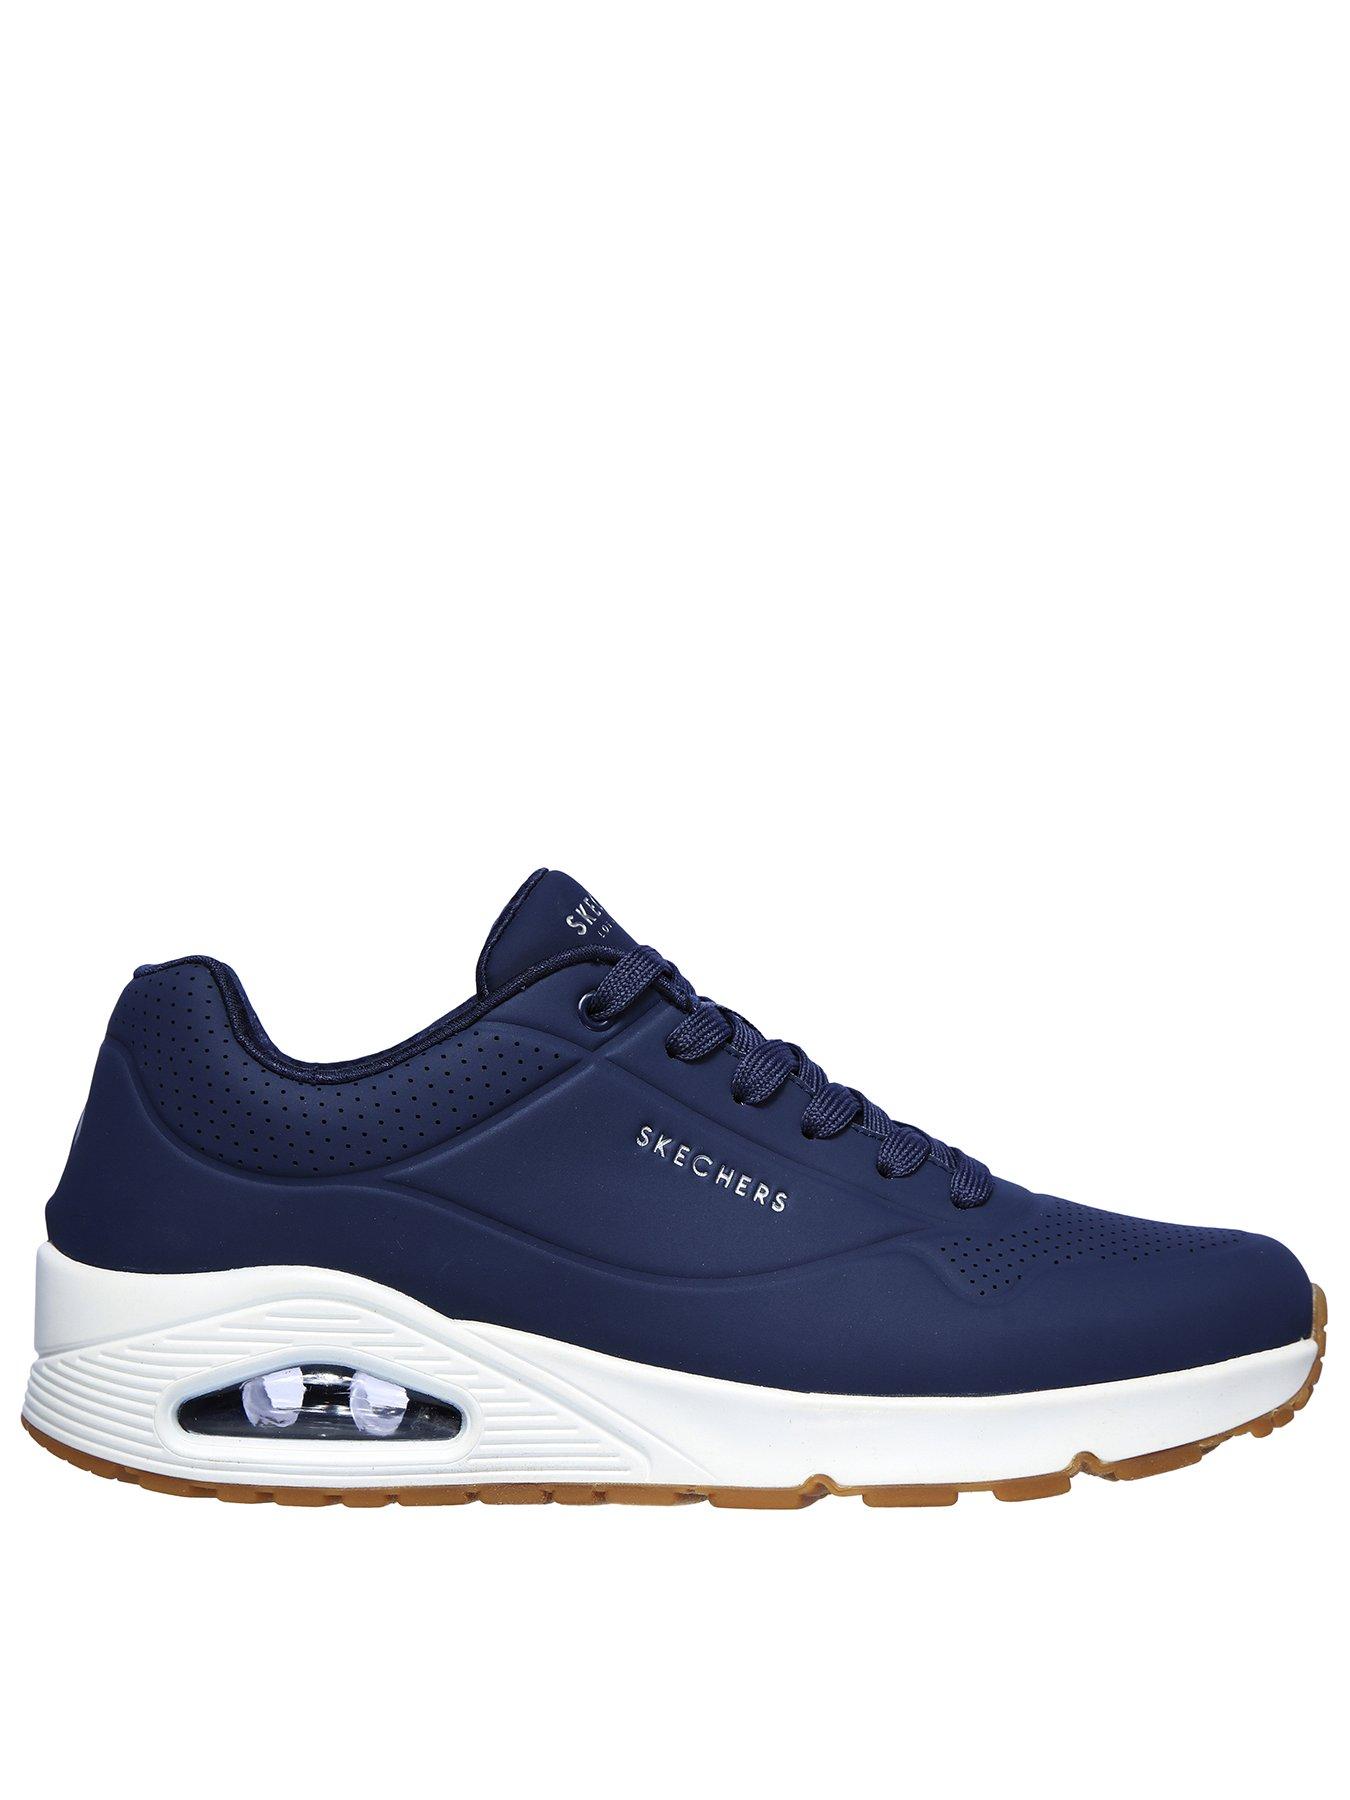 Uno Stand on Air Lace Up Trainers - Navy